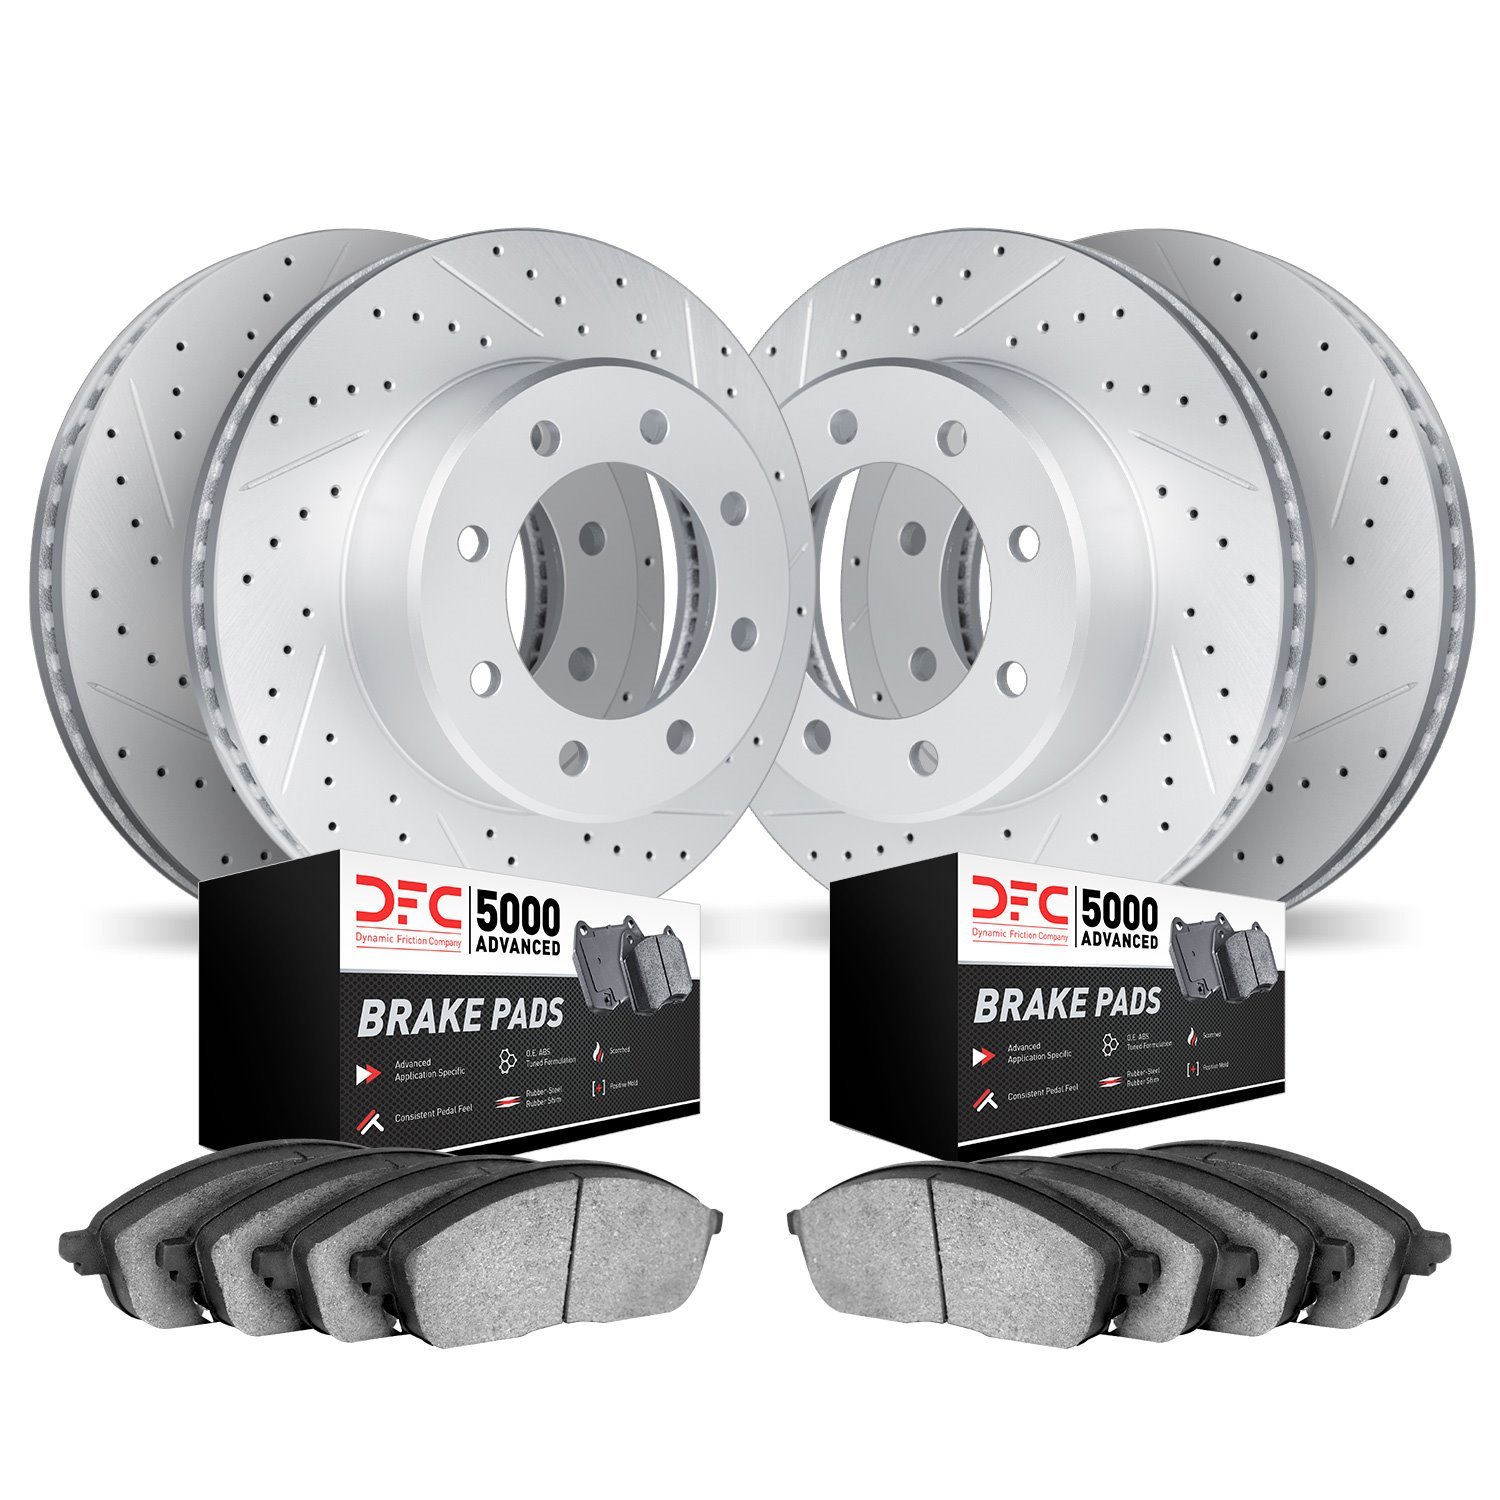 2504-40104 Geoperformance Drilled/Slotted Rotors w/5000 Advanced Brake Pads Kit, Fits Select Mopar, Position: Front and Rear